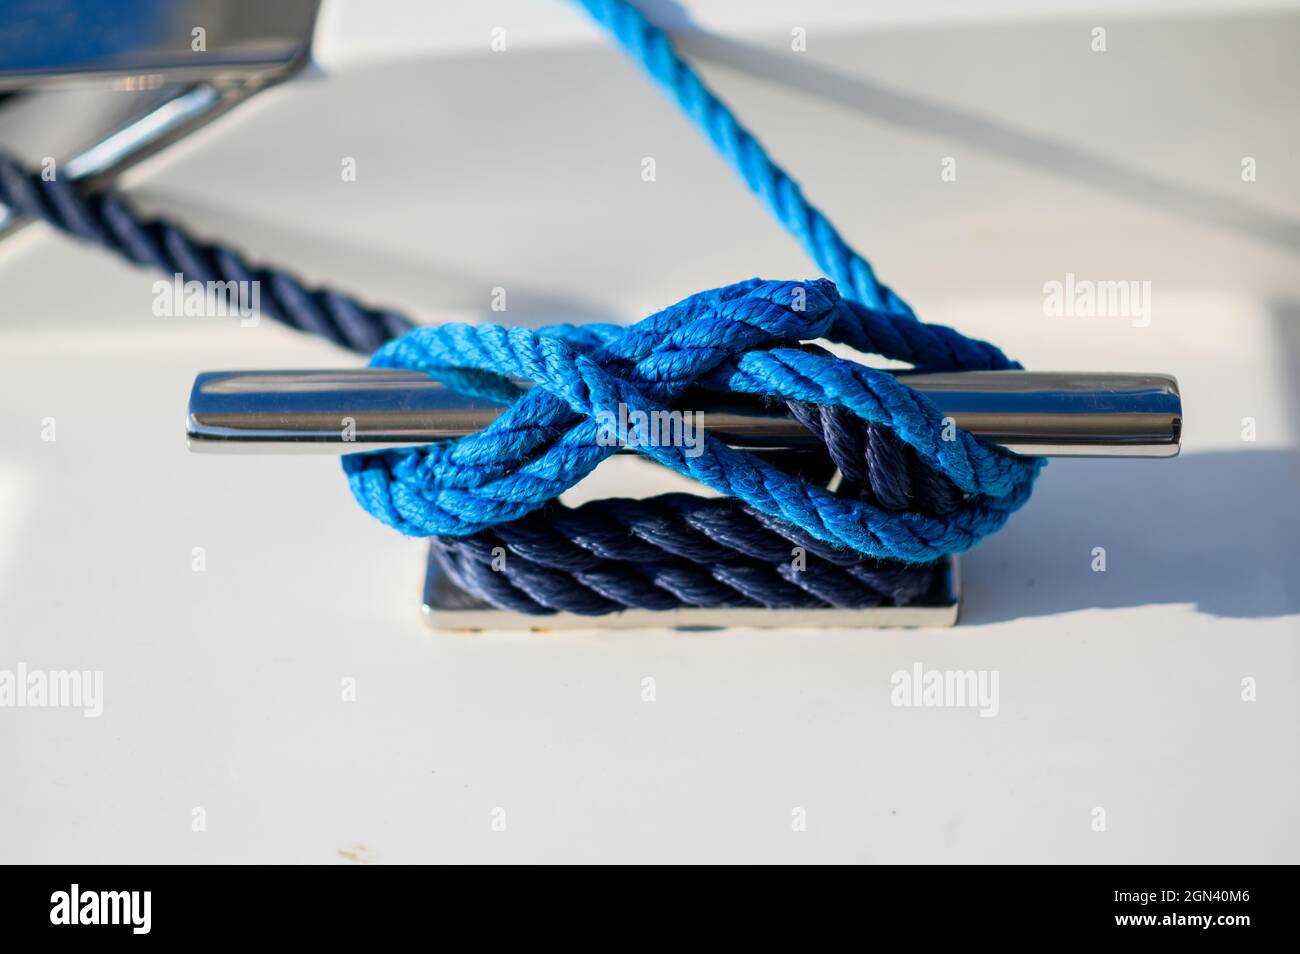 Mooring rope. Blue mooring rope tied around steel anchor on boat or ship Stock Photo